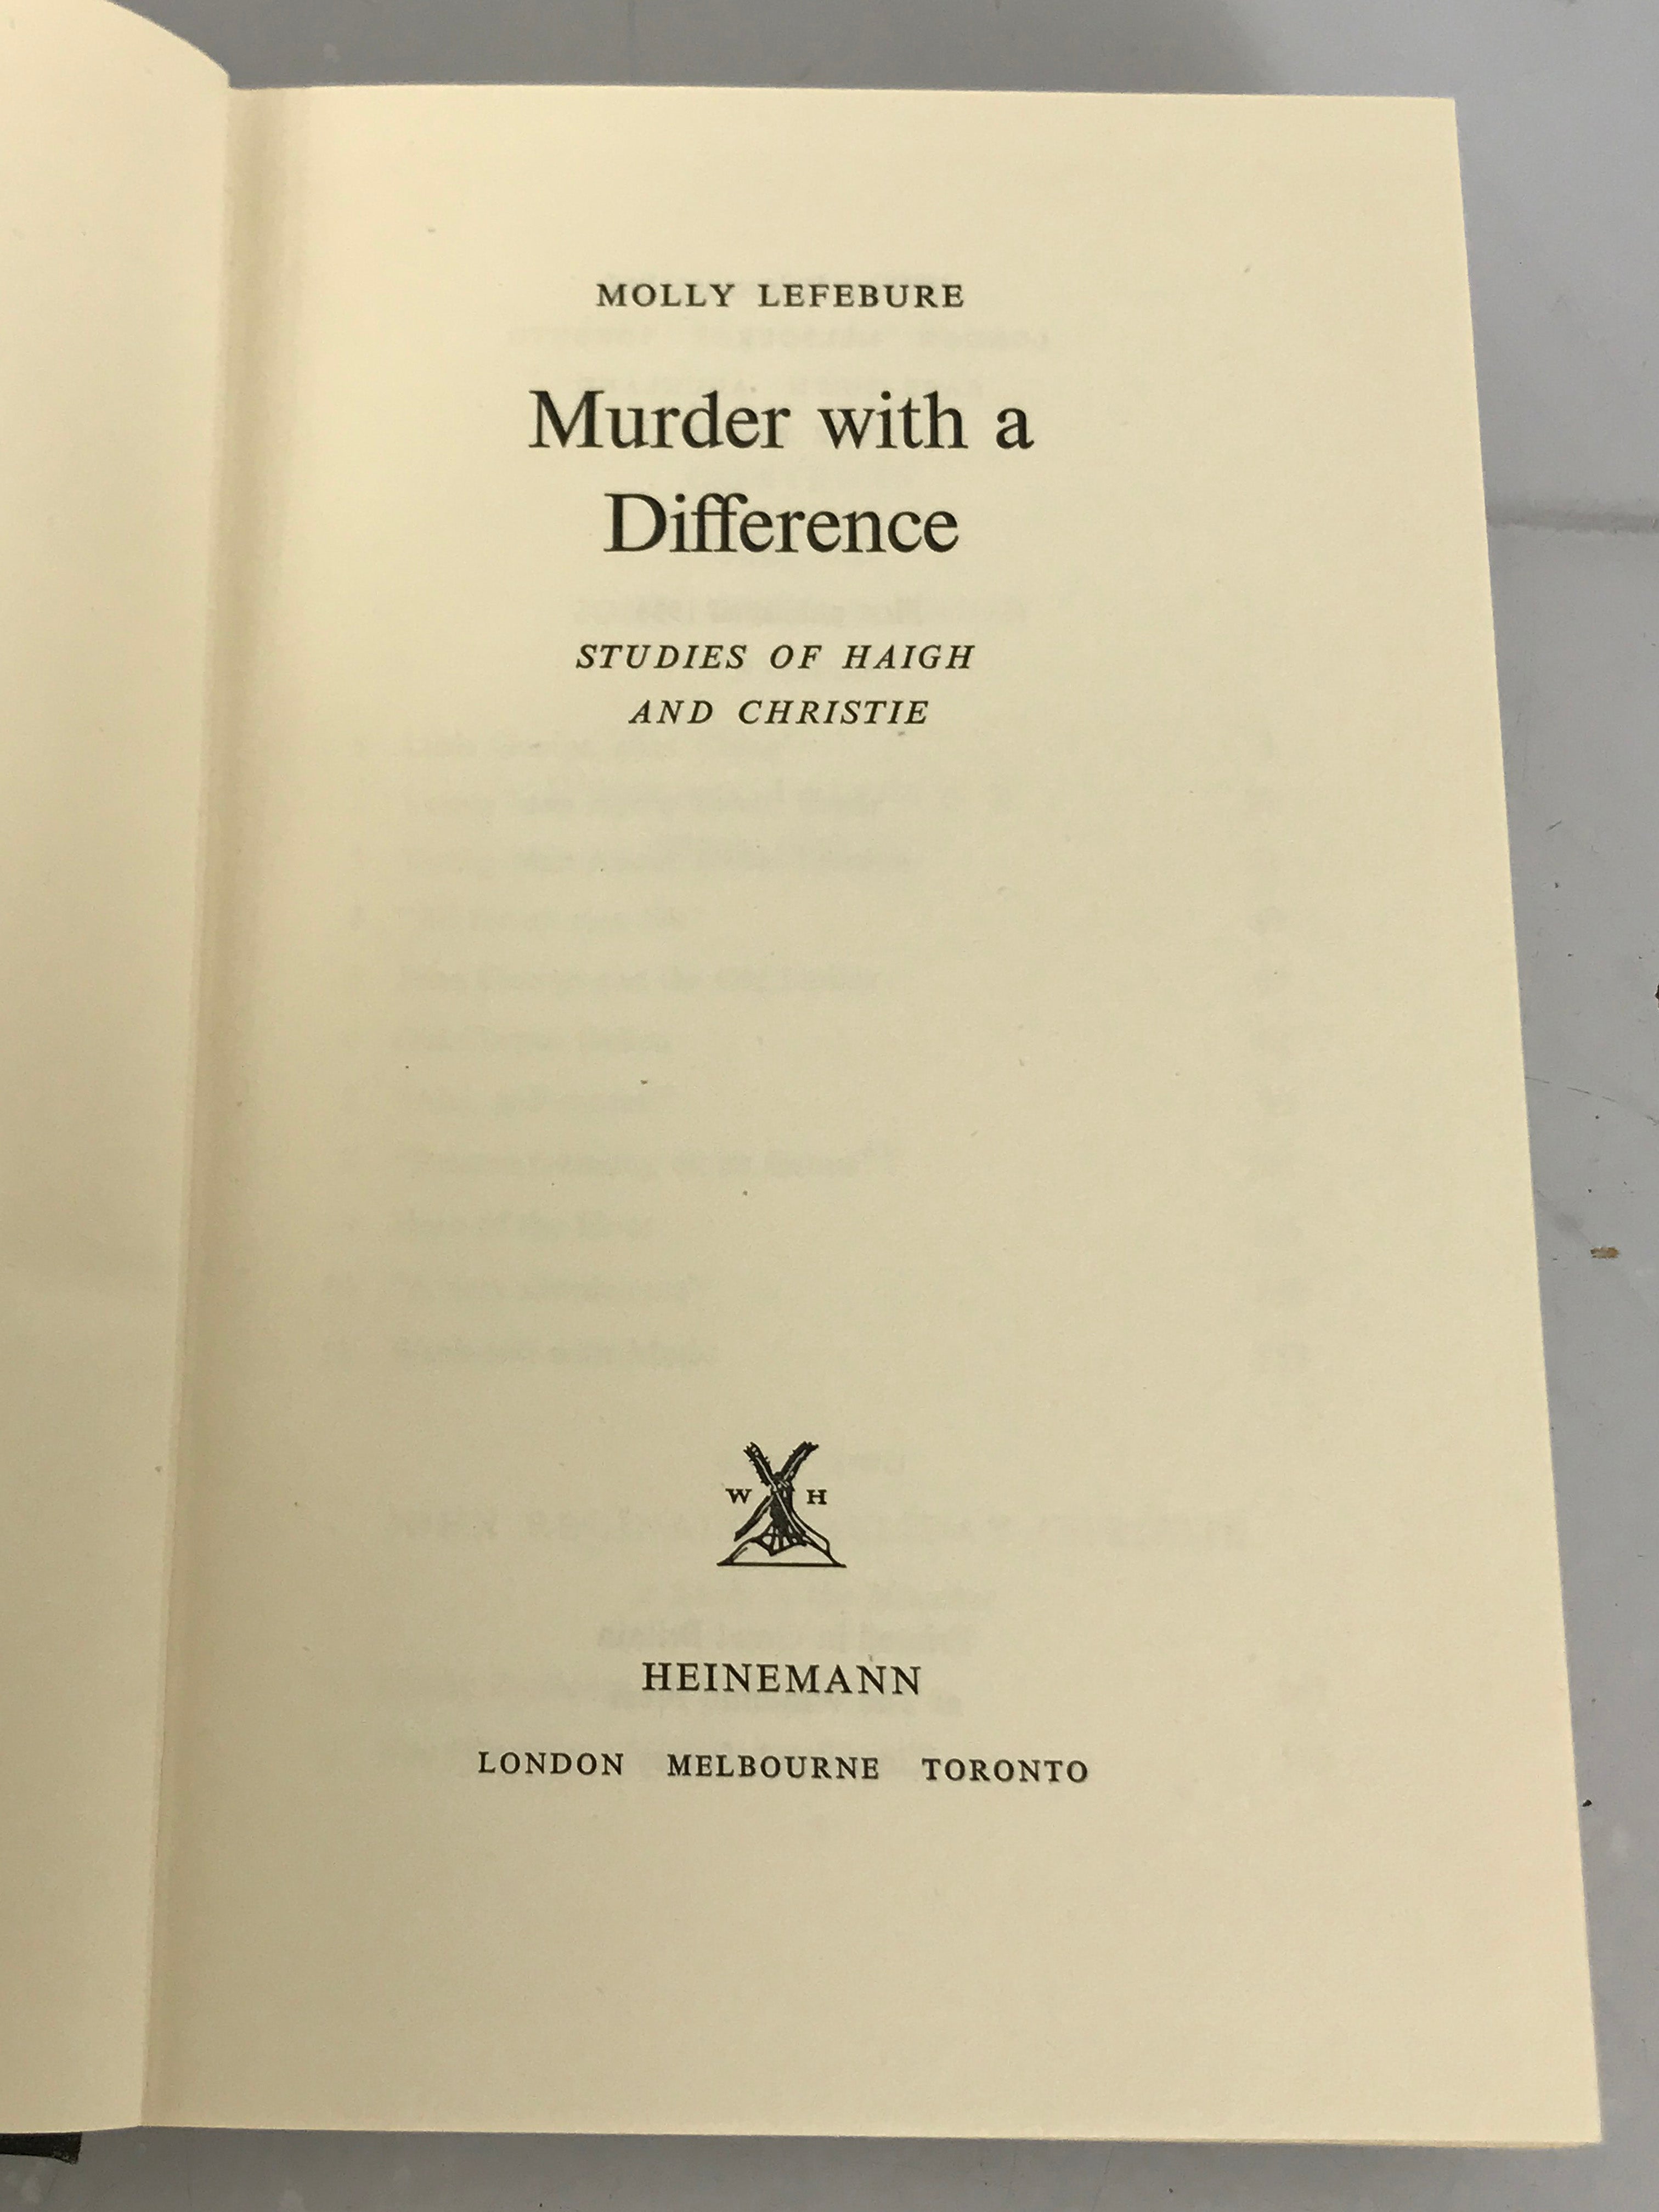 Murder With a Difference The Cases of Haigh and Christie by Molly Lefebure 1958 HC DJ